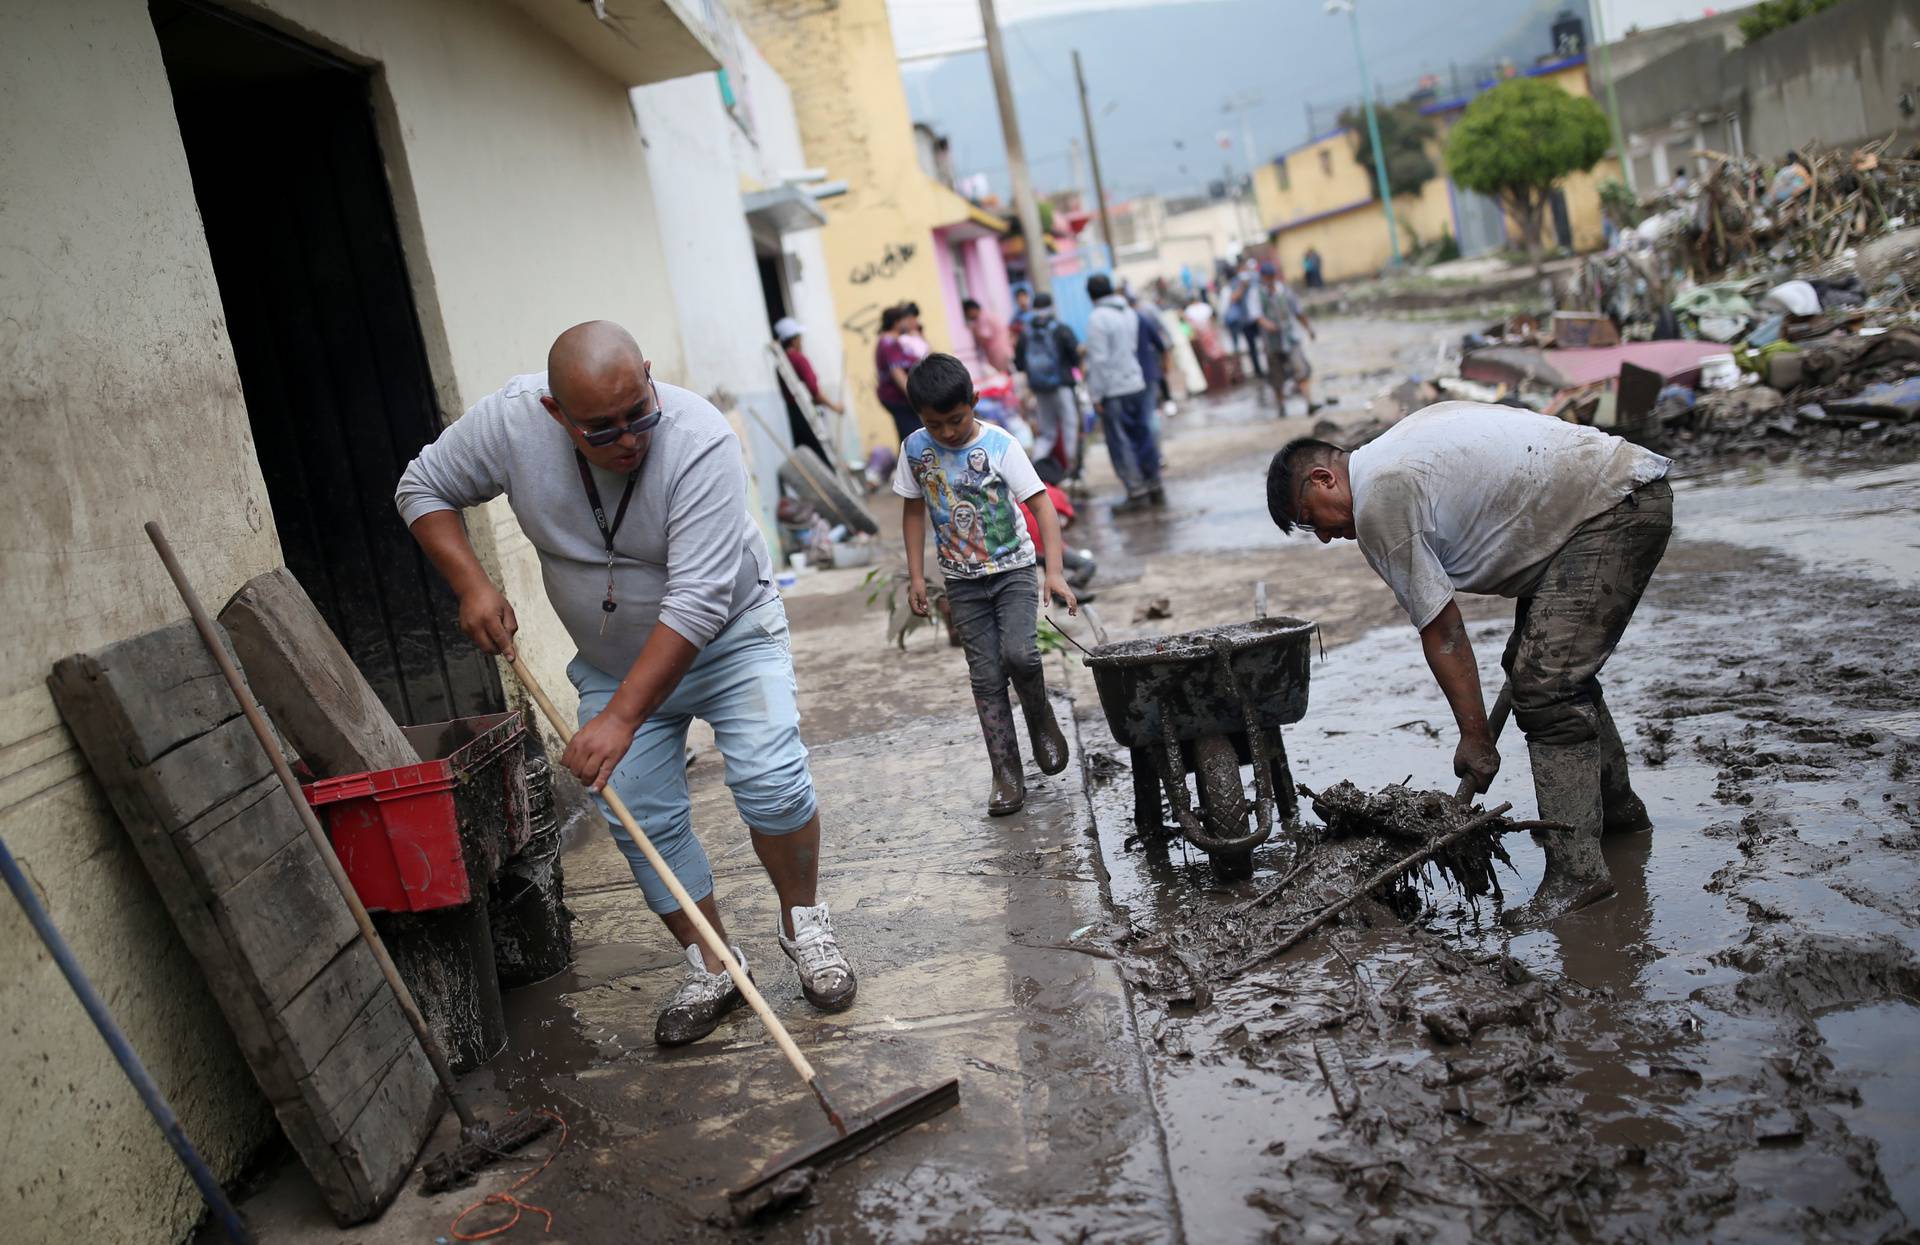 People clean up debris of the damage caused by heavy rainfall in the municipality of Ecatepec